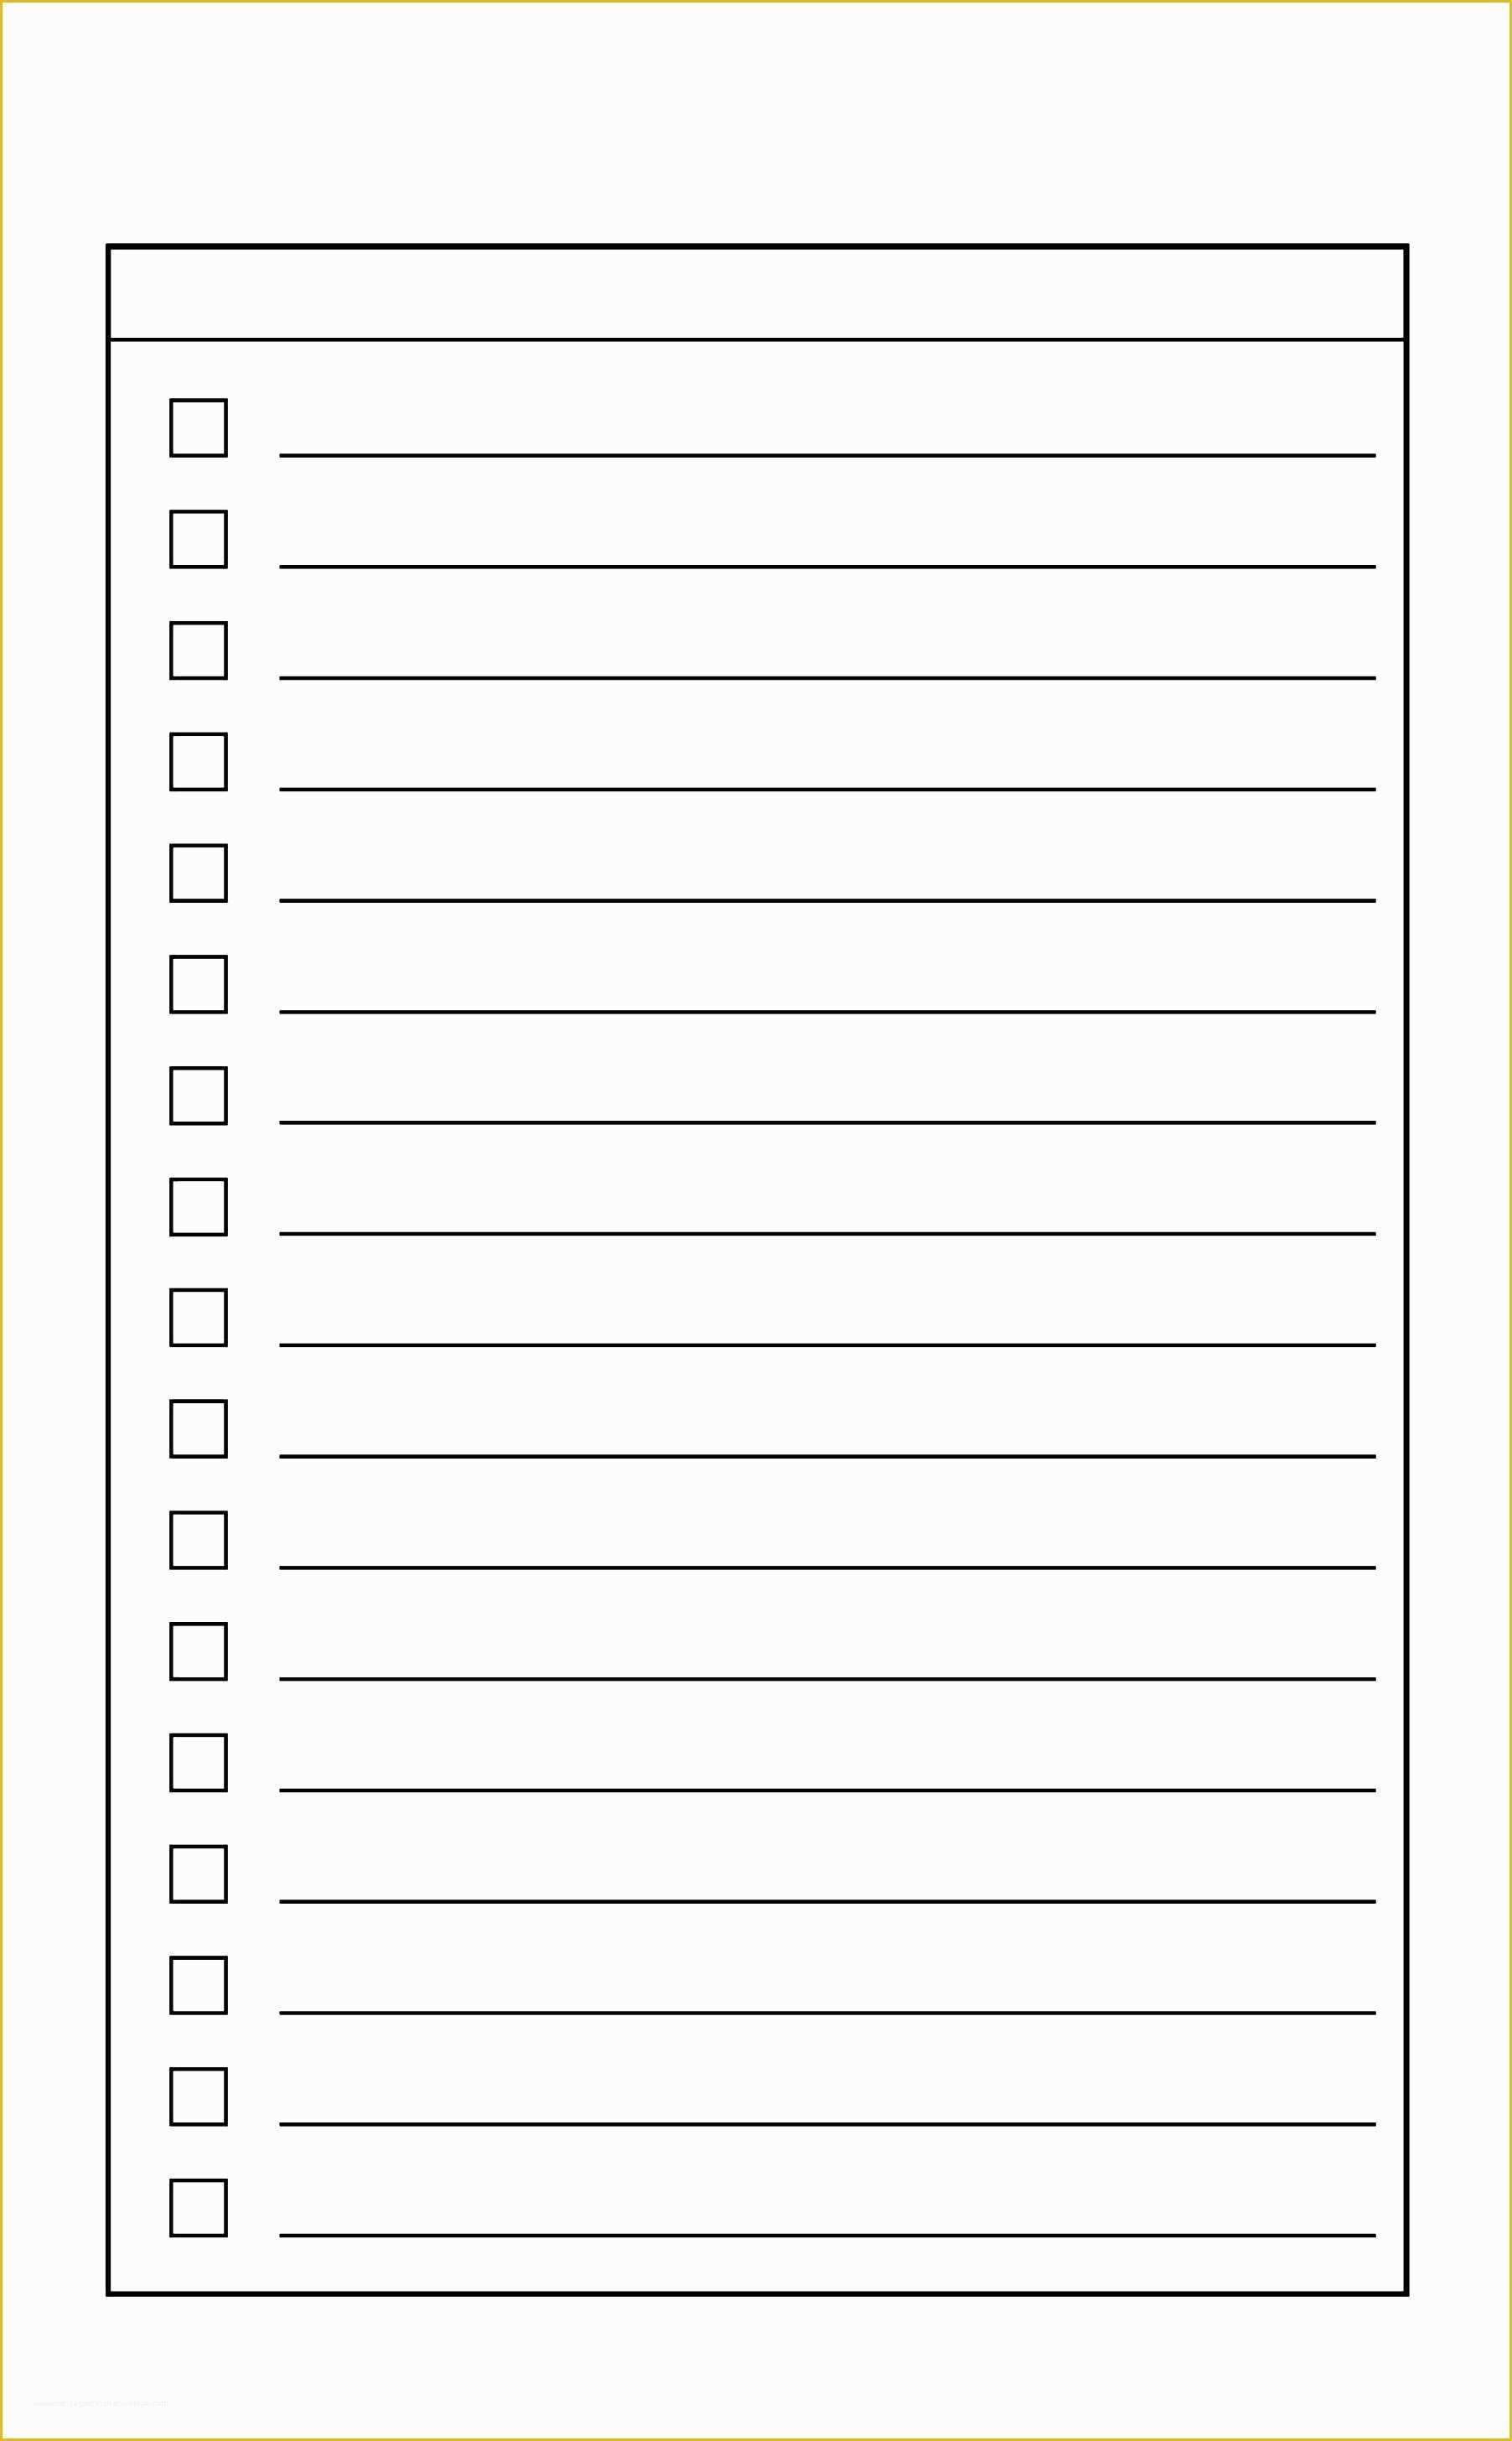 7-best-images-of-free-printable-daily-to-do-list-template-free-free